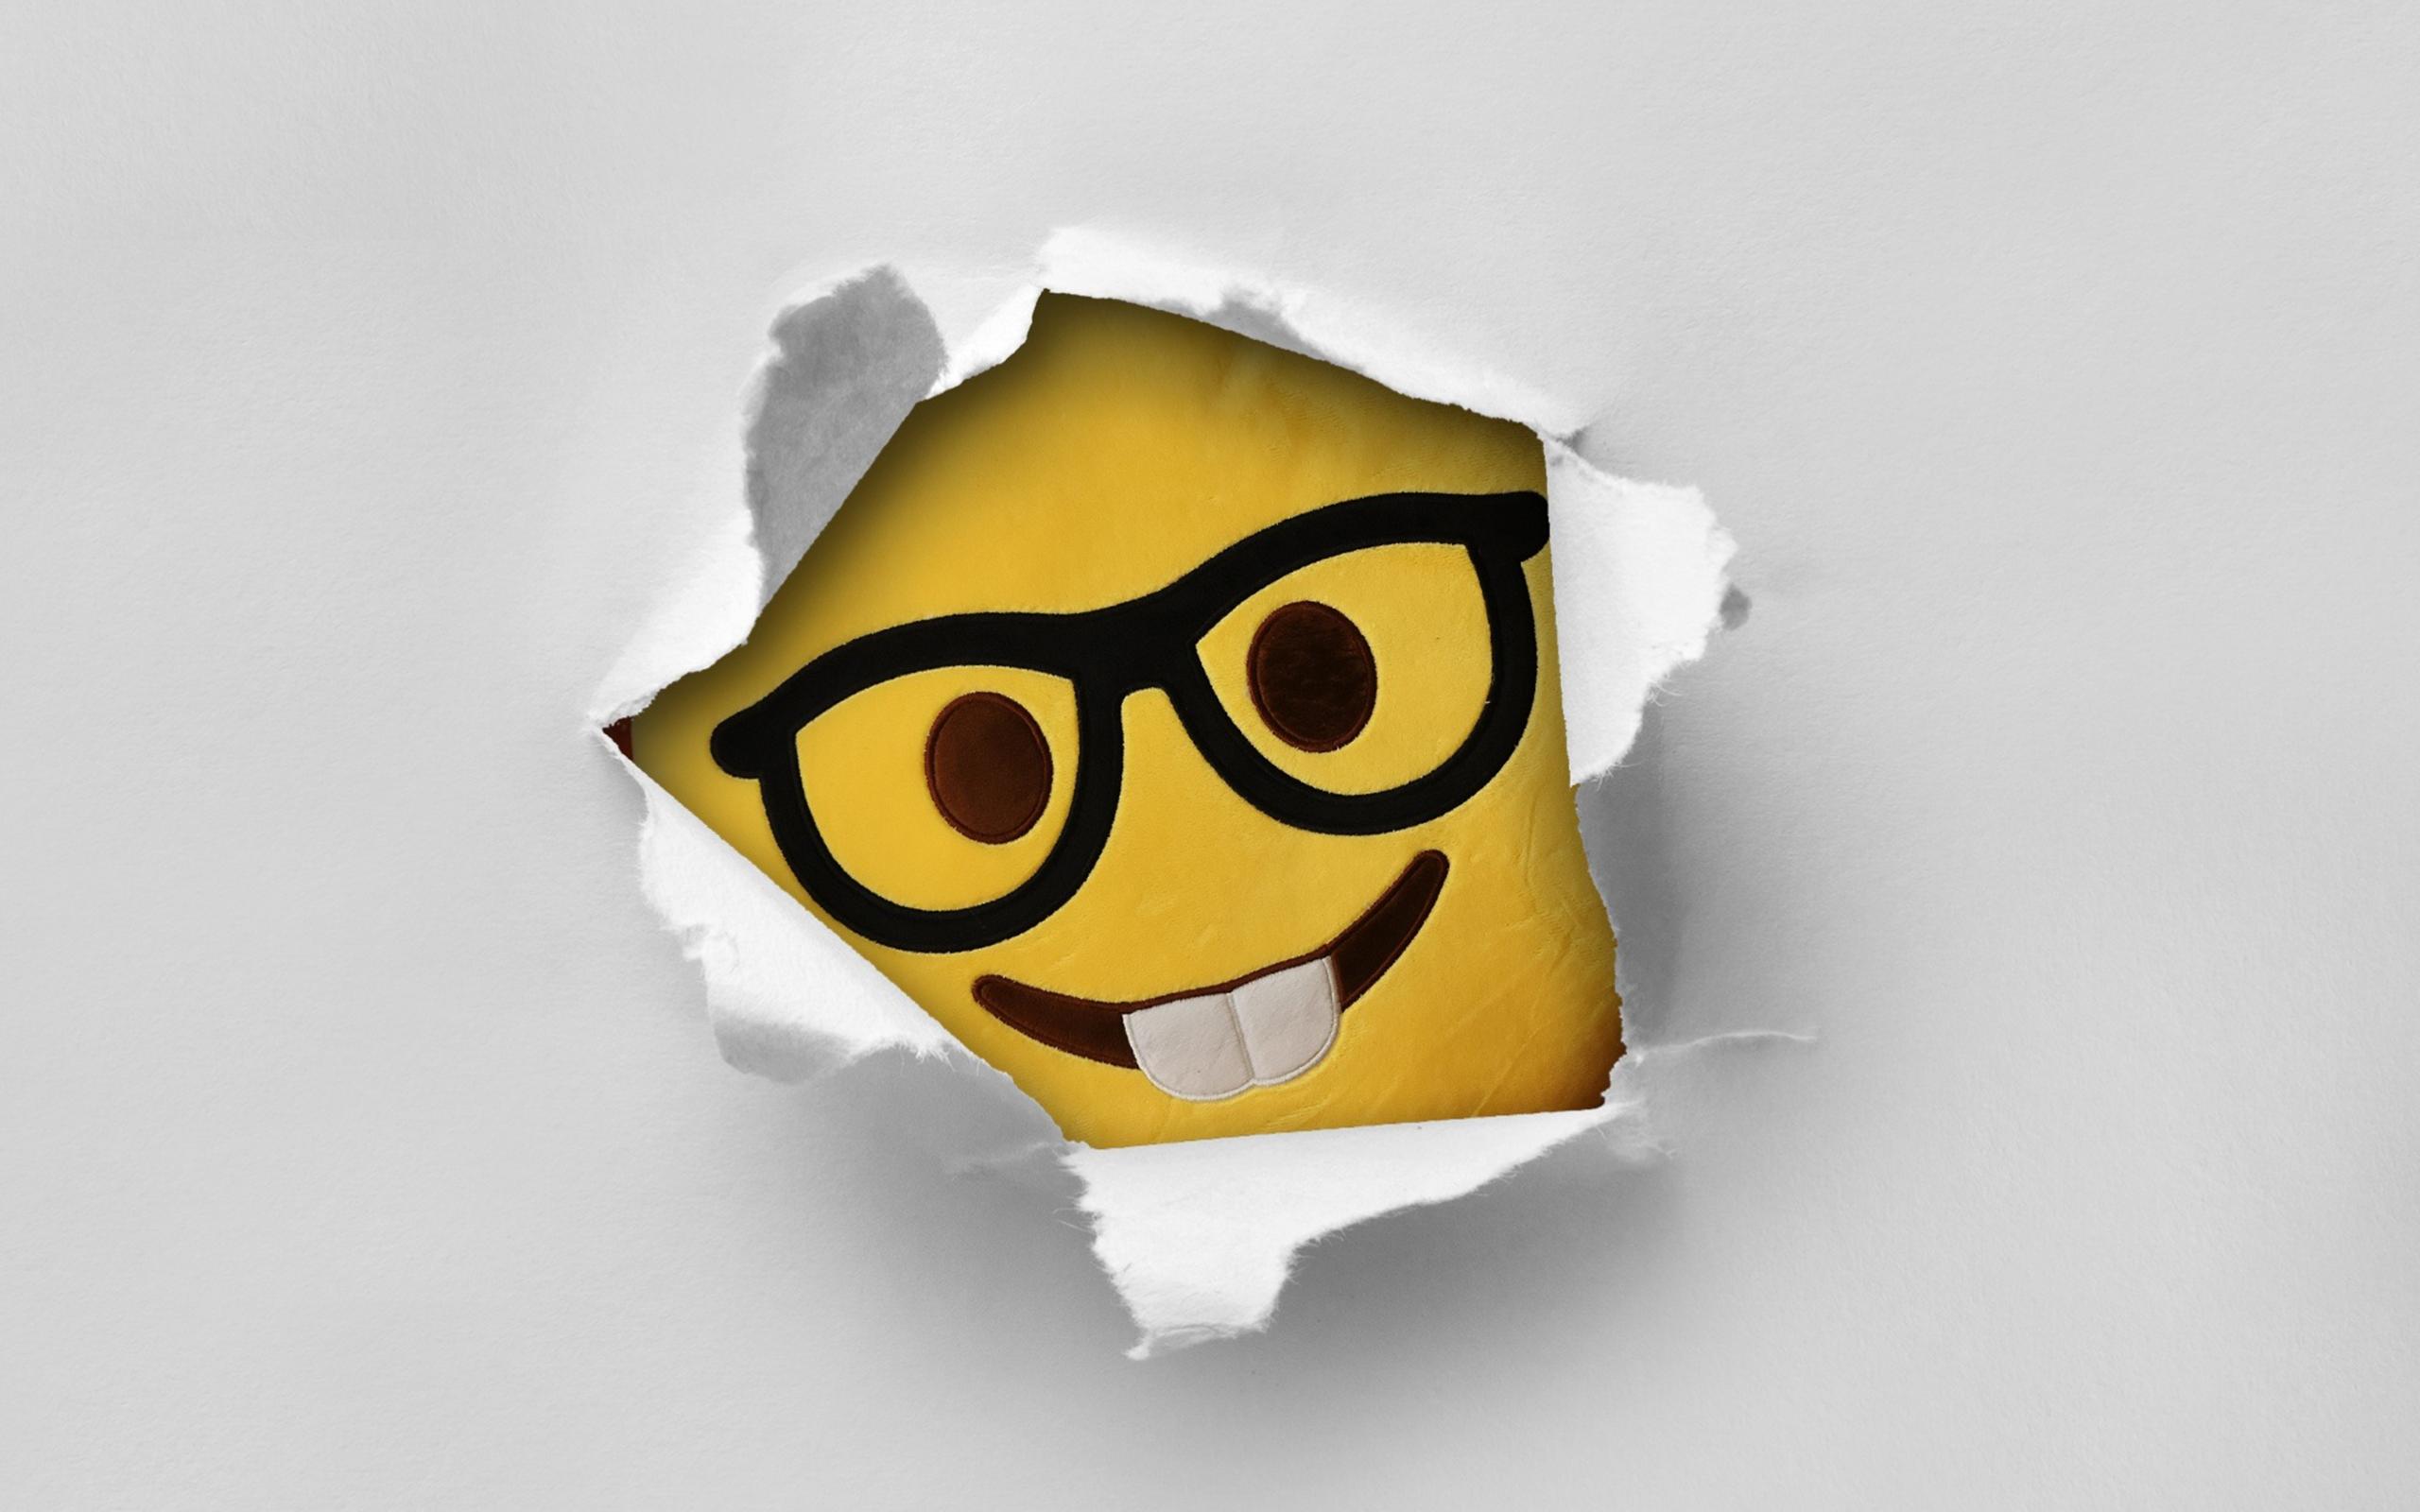 Tapety Emoji for Android - APK Download